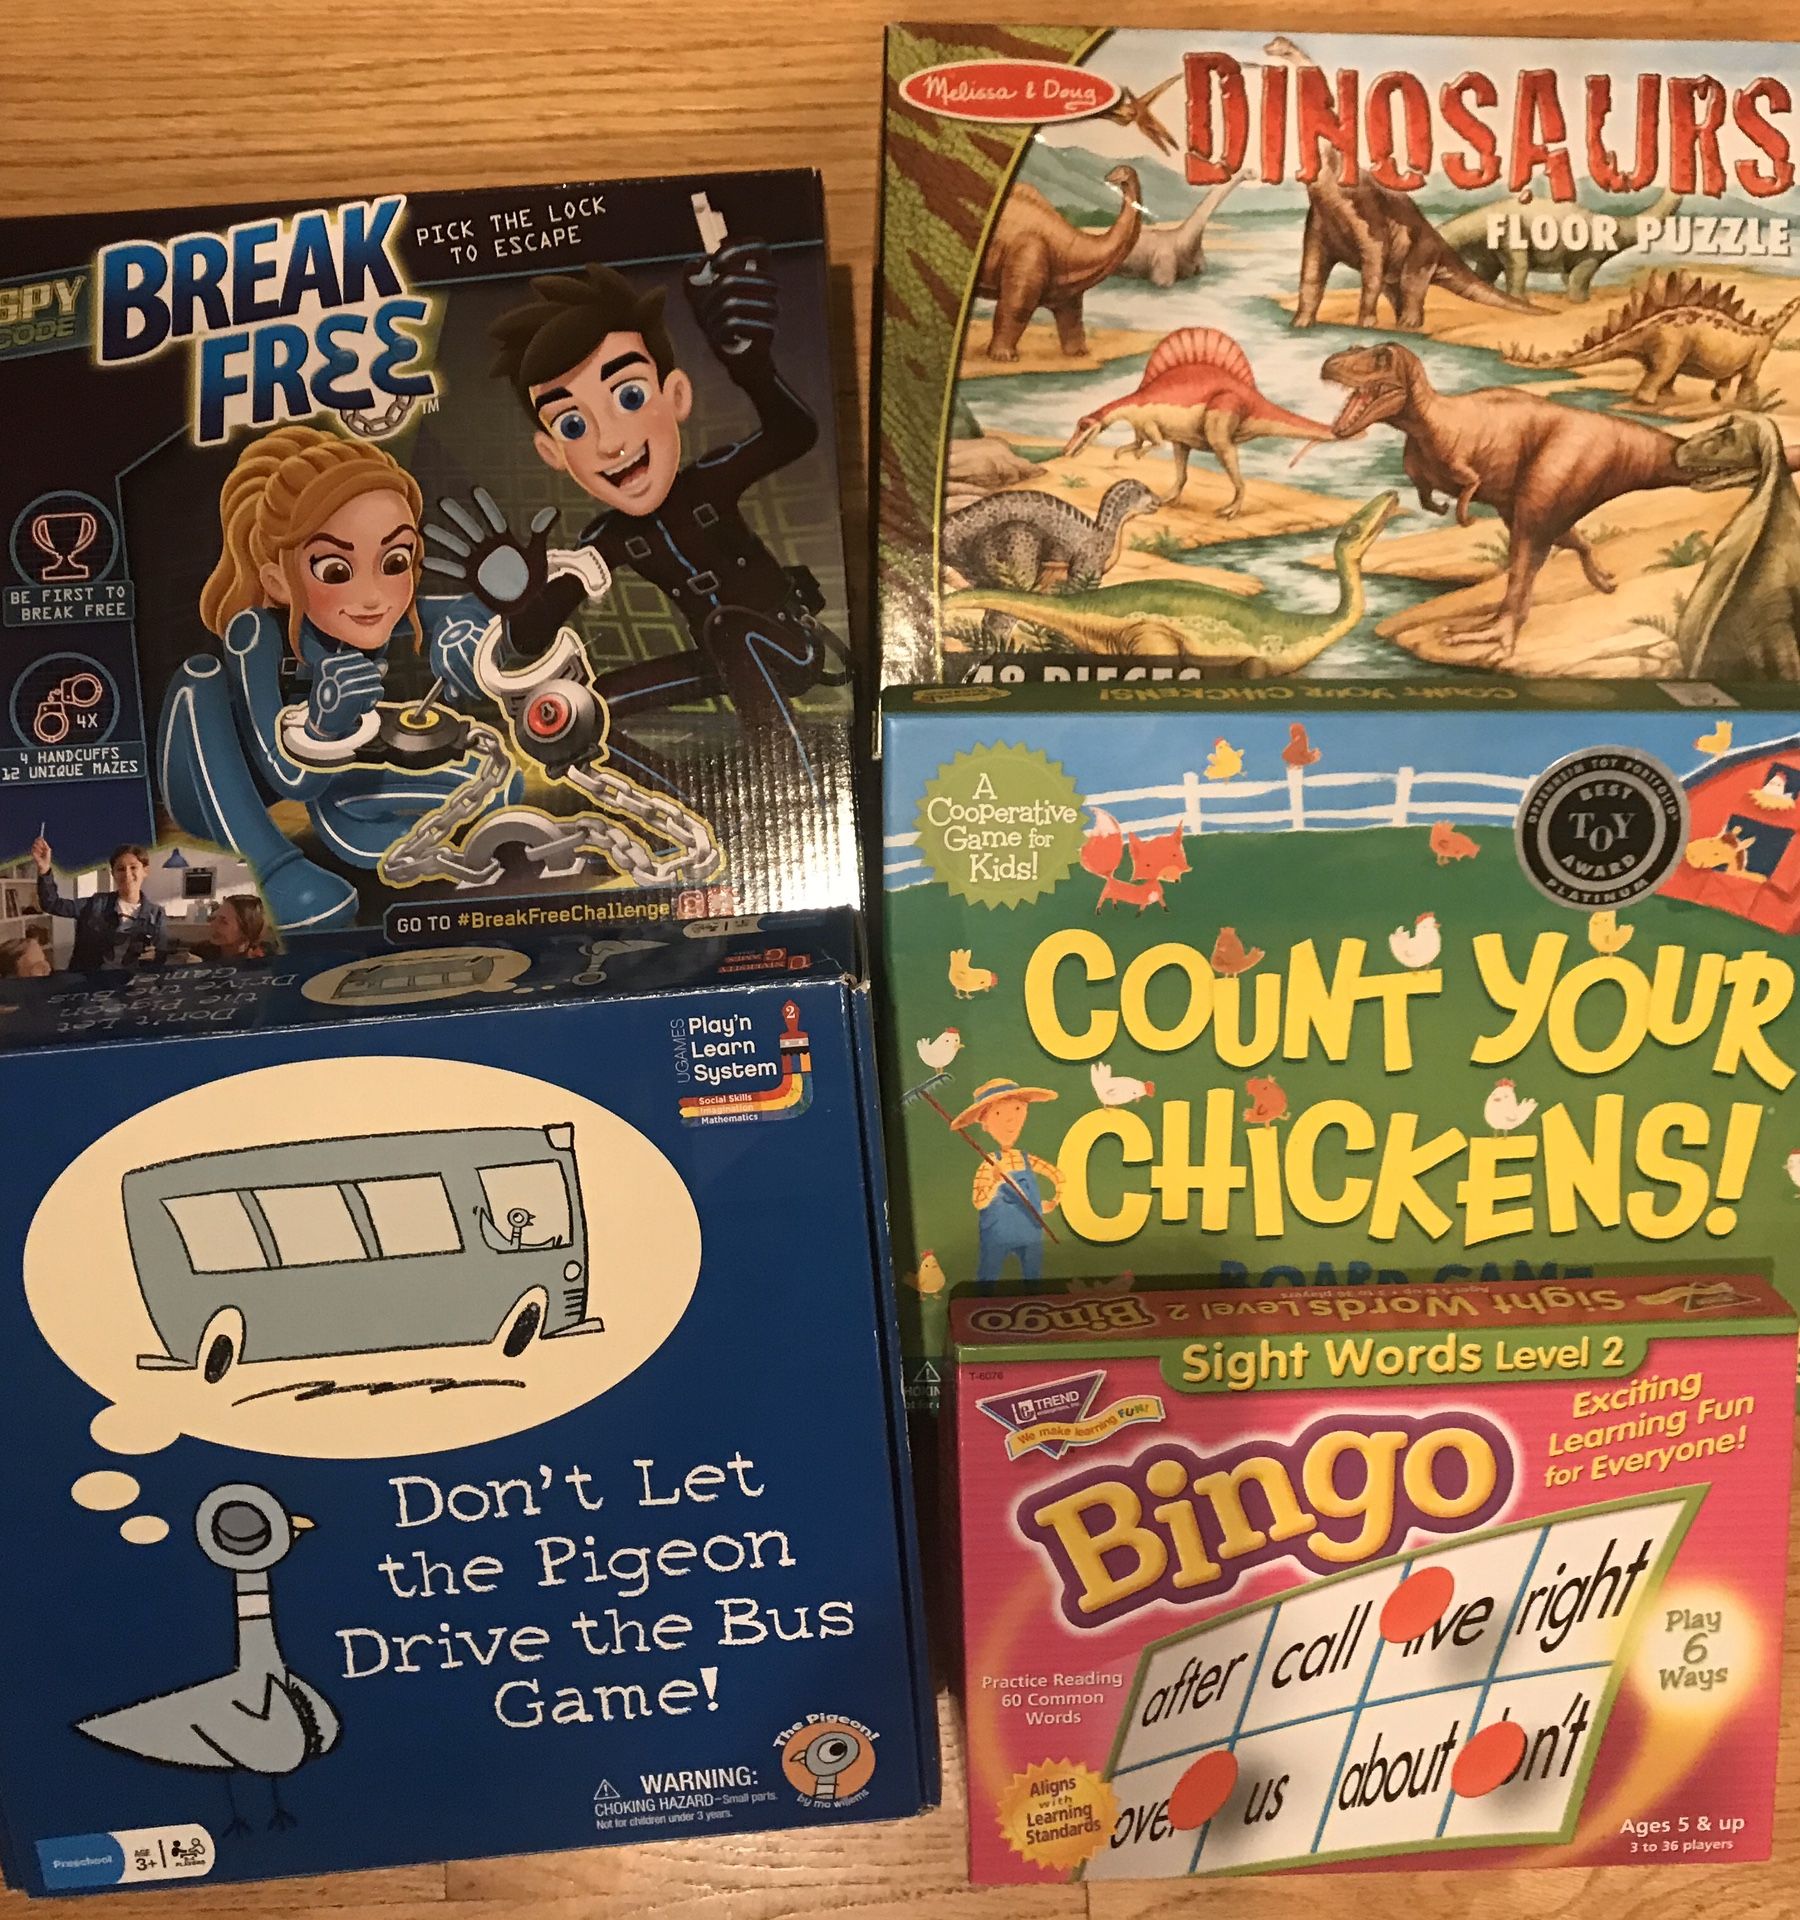 Games and puzzles (like new)